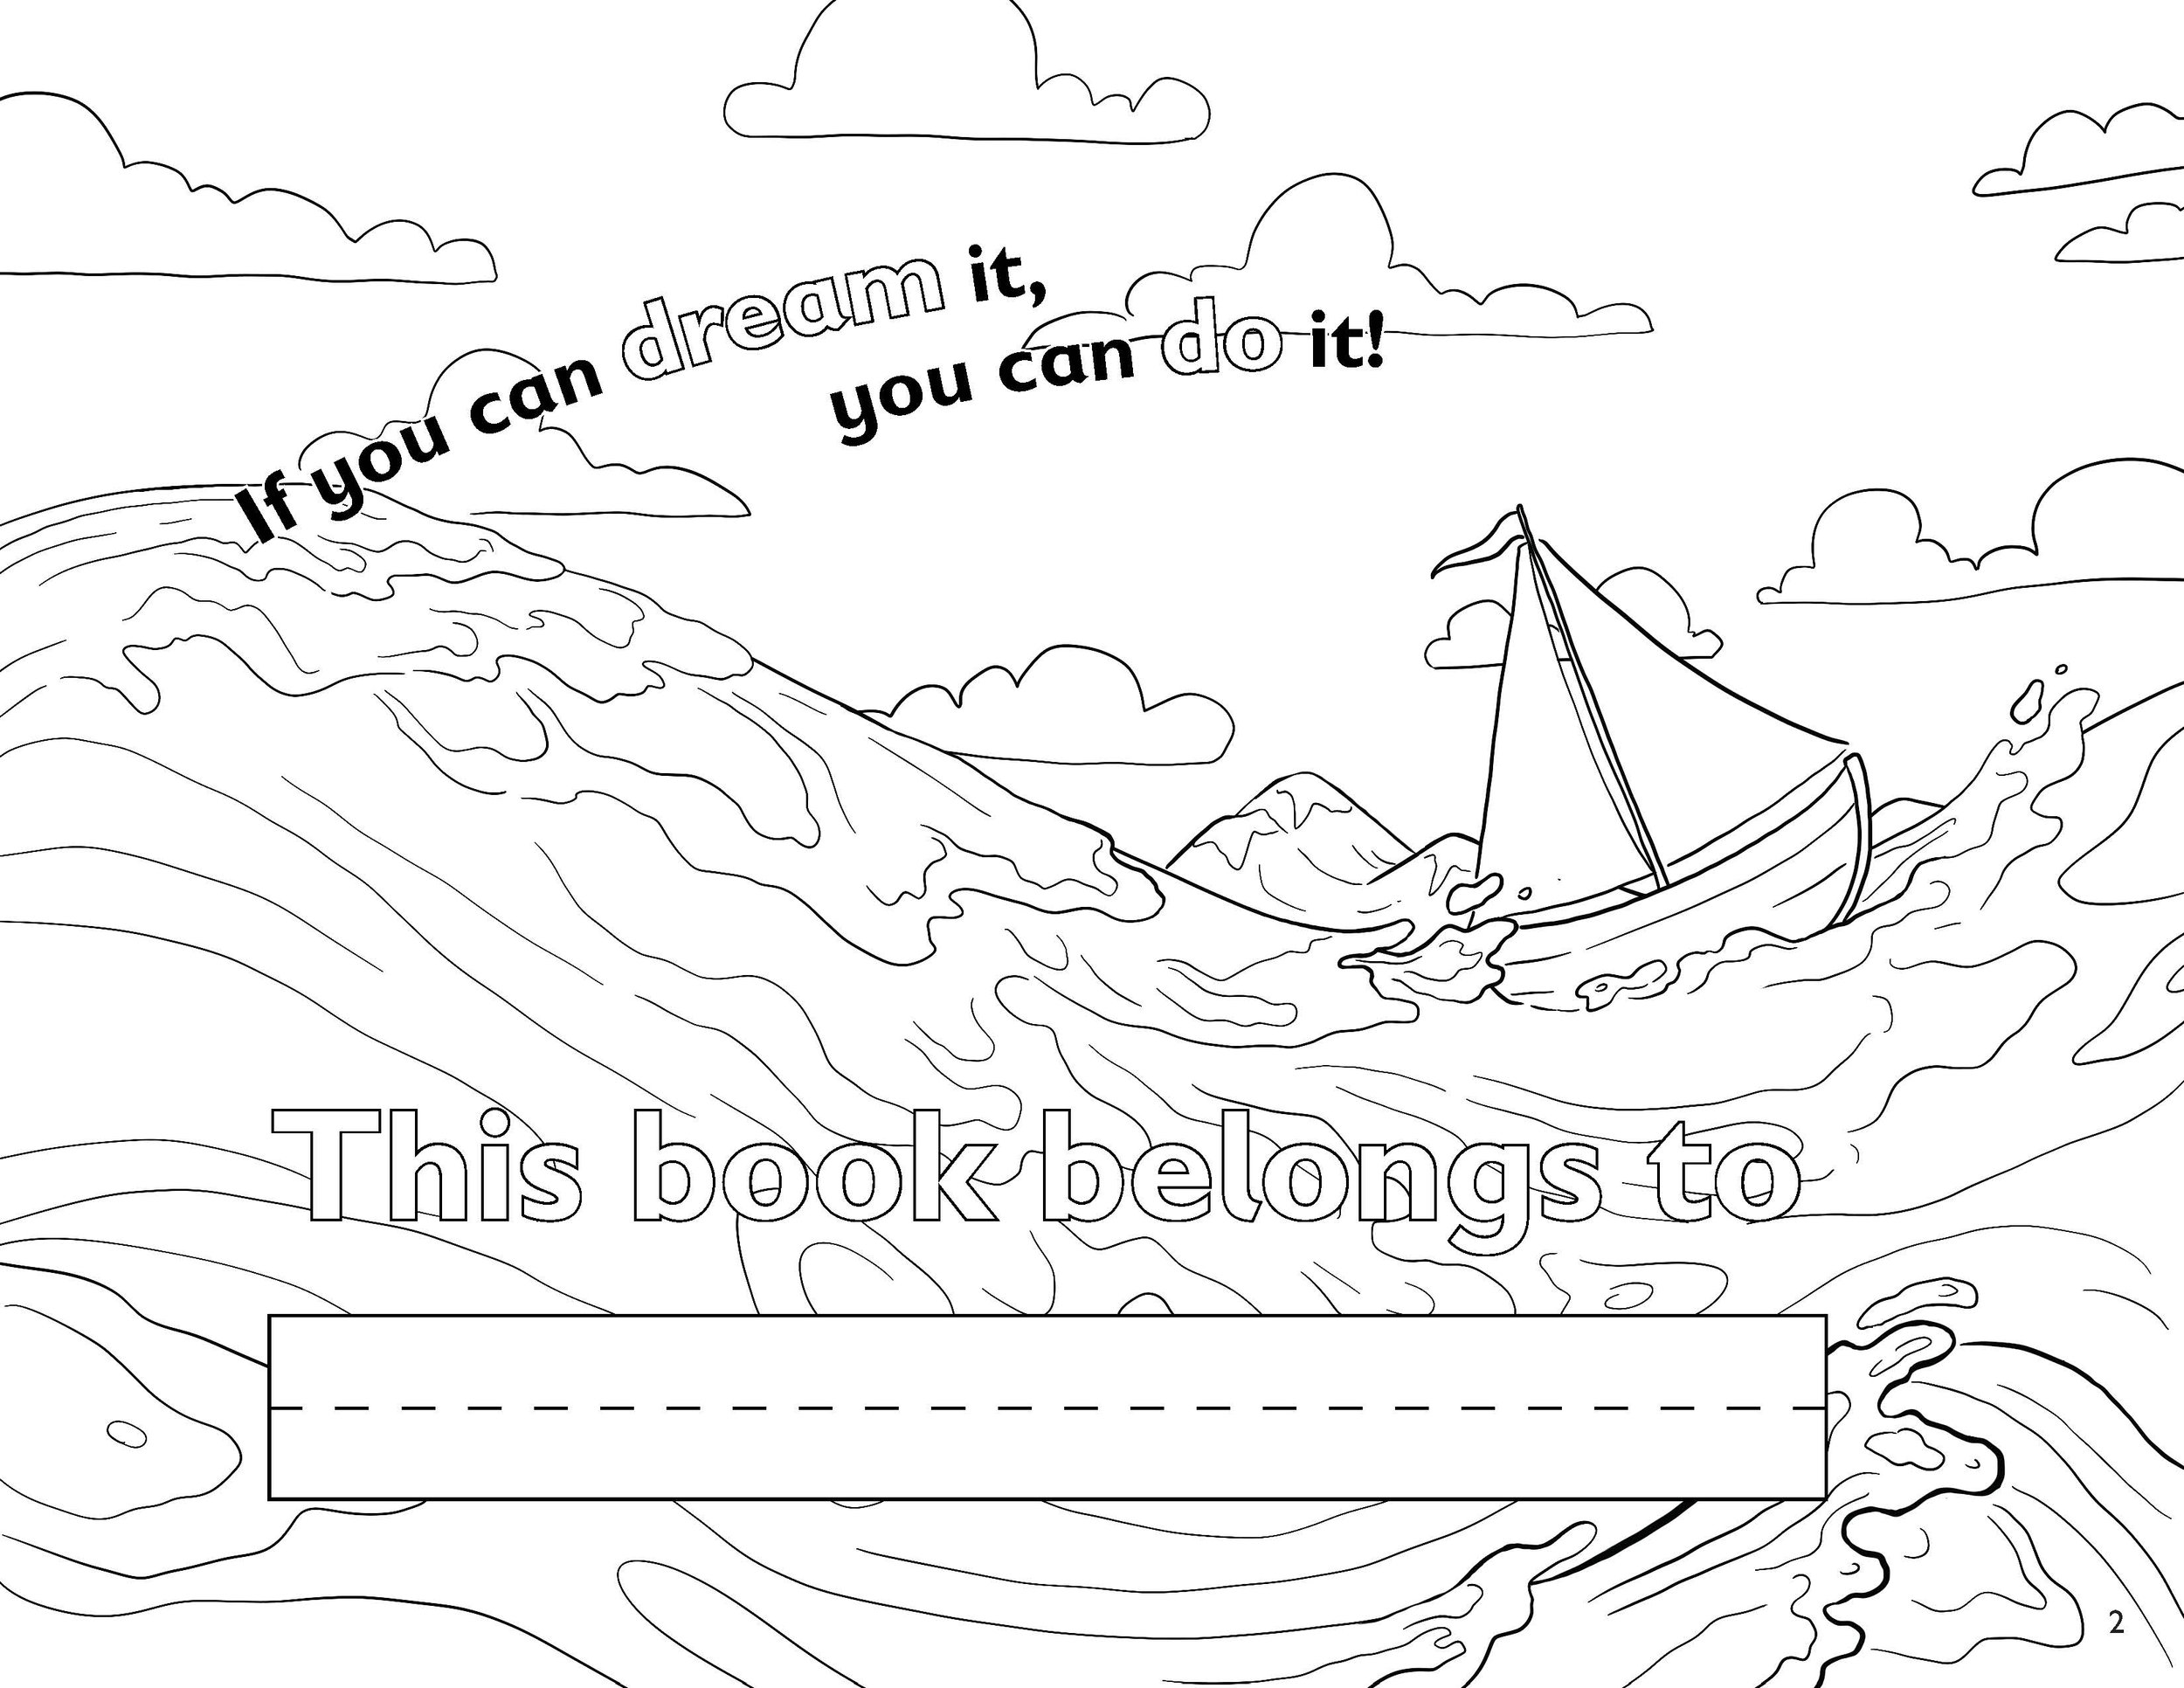 7-14Goes to Sea Coloring book_Page_02.jpg